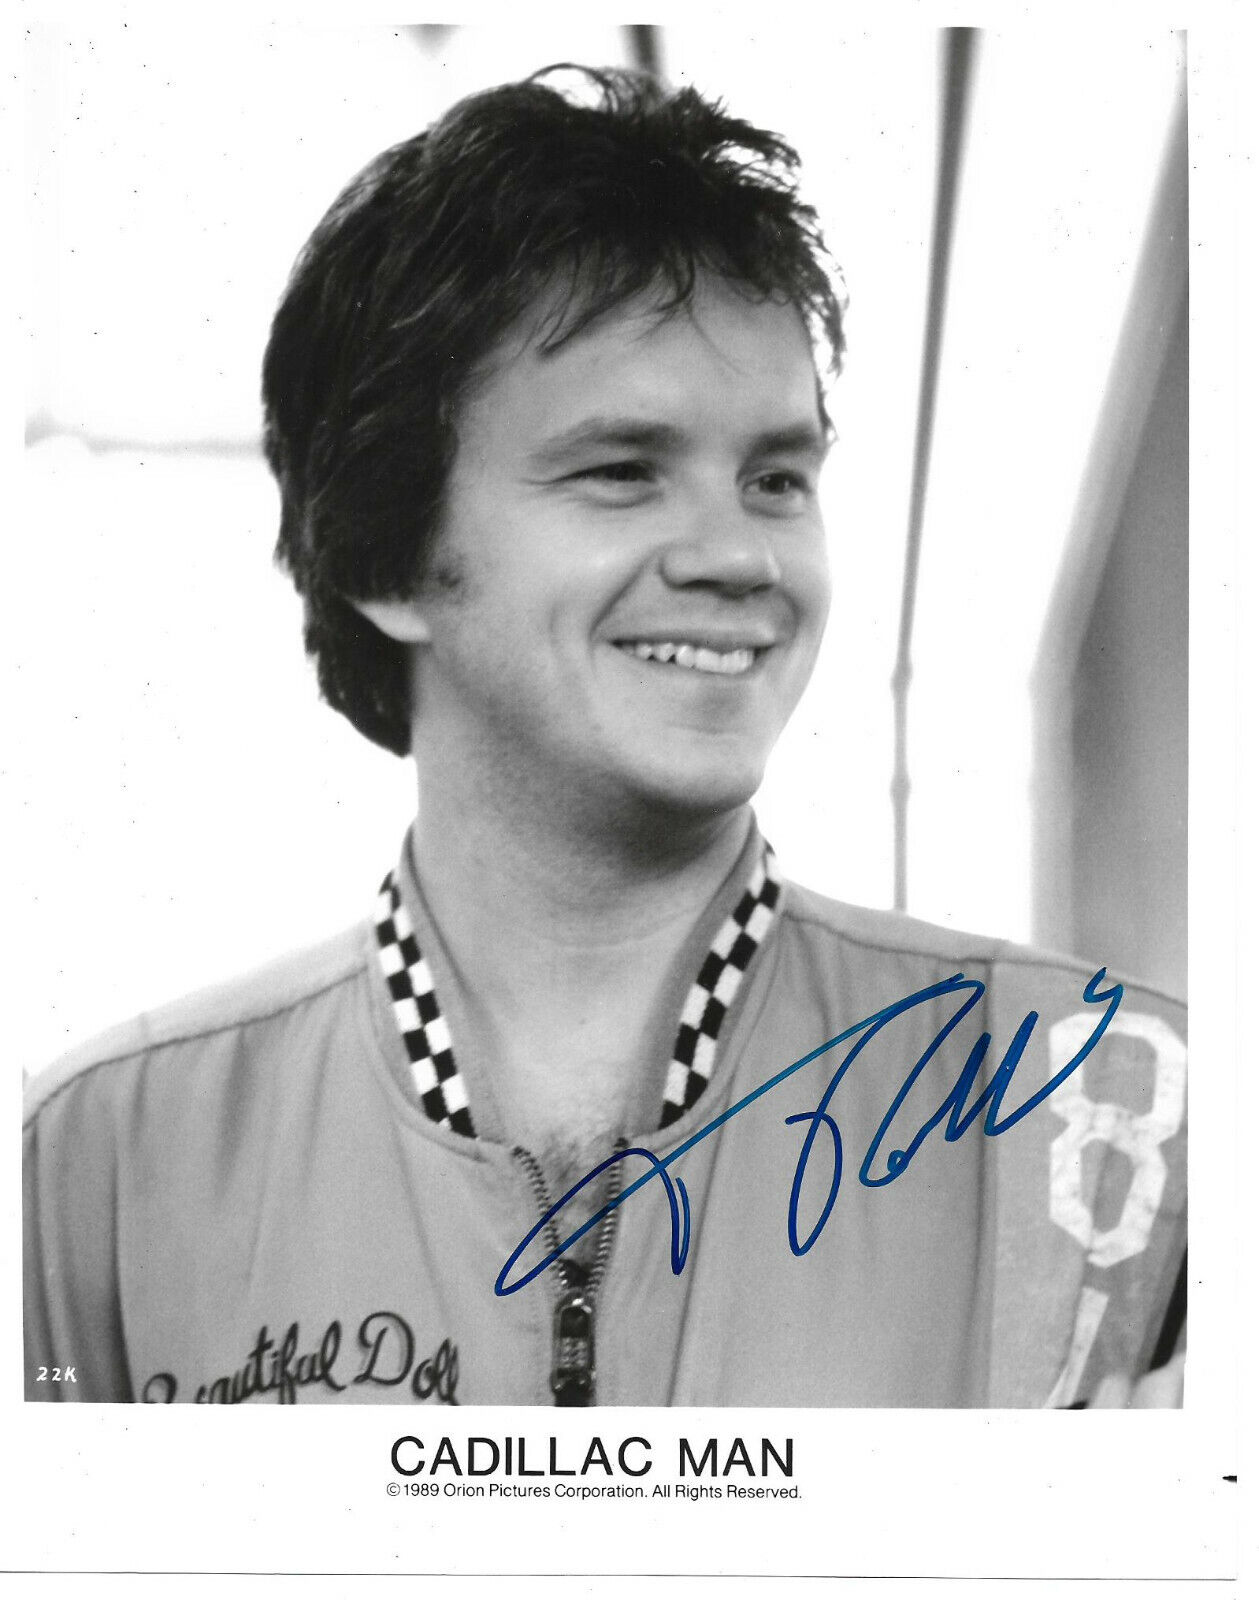 Tim Robbins Authentic Signed 8x10 Studio Photo Poster painting Autographed, Cadillac Man